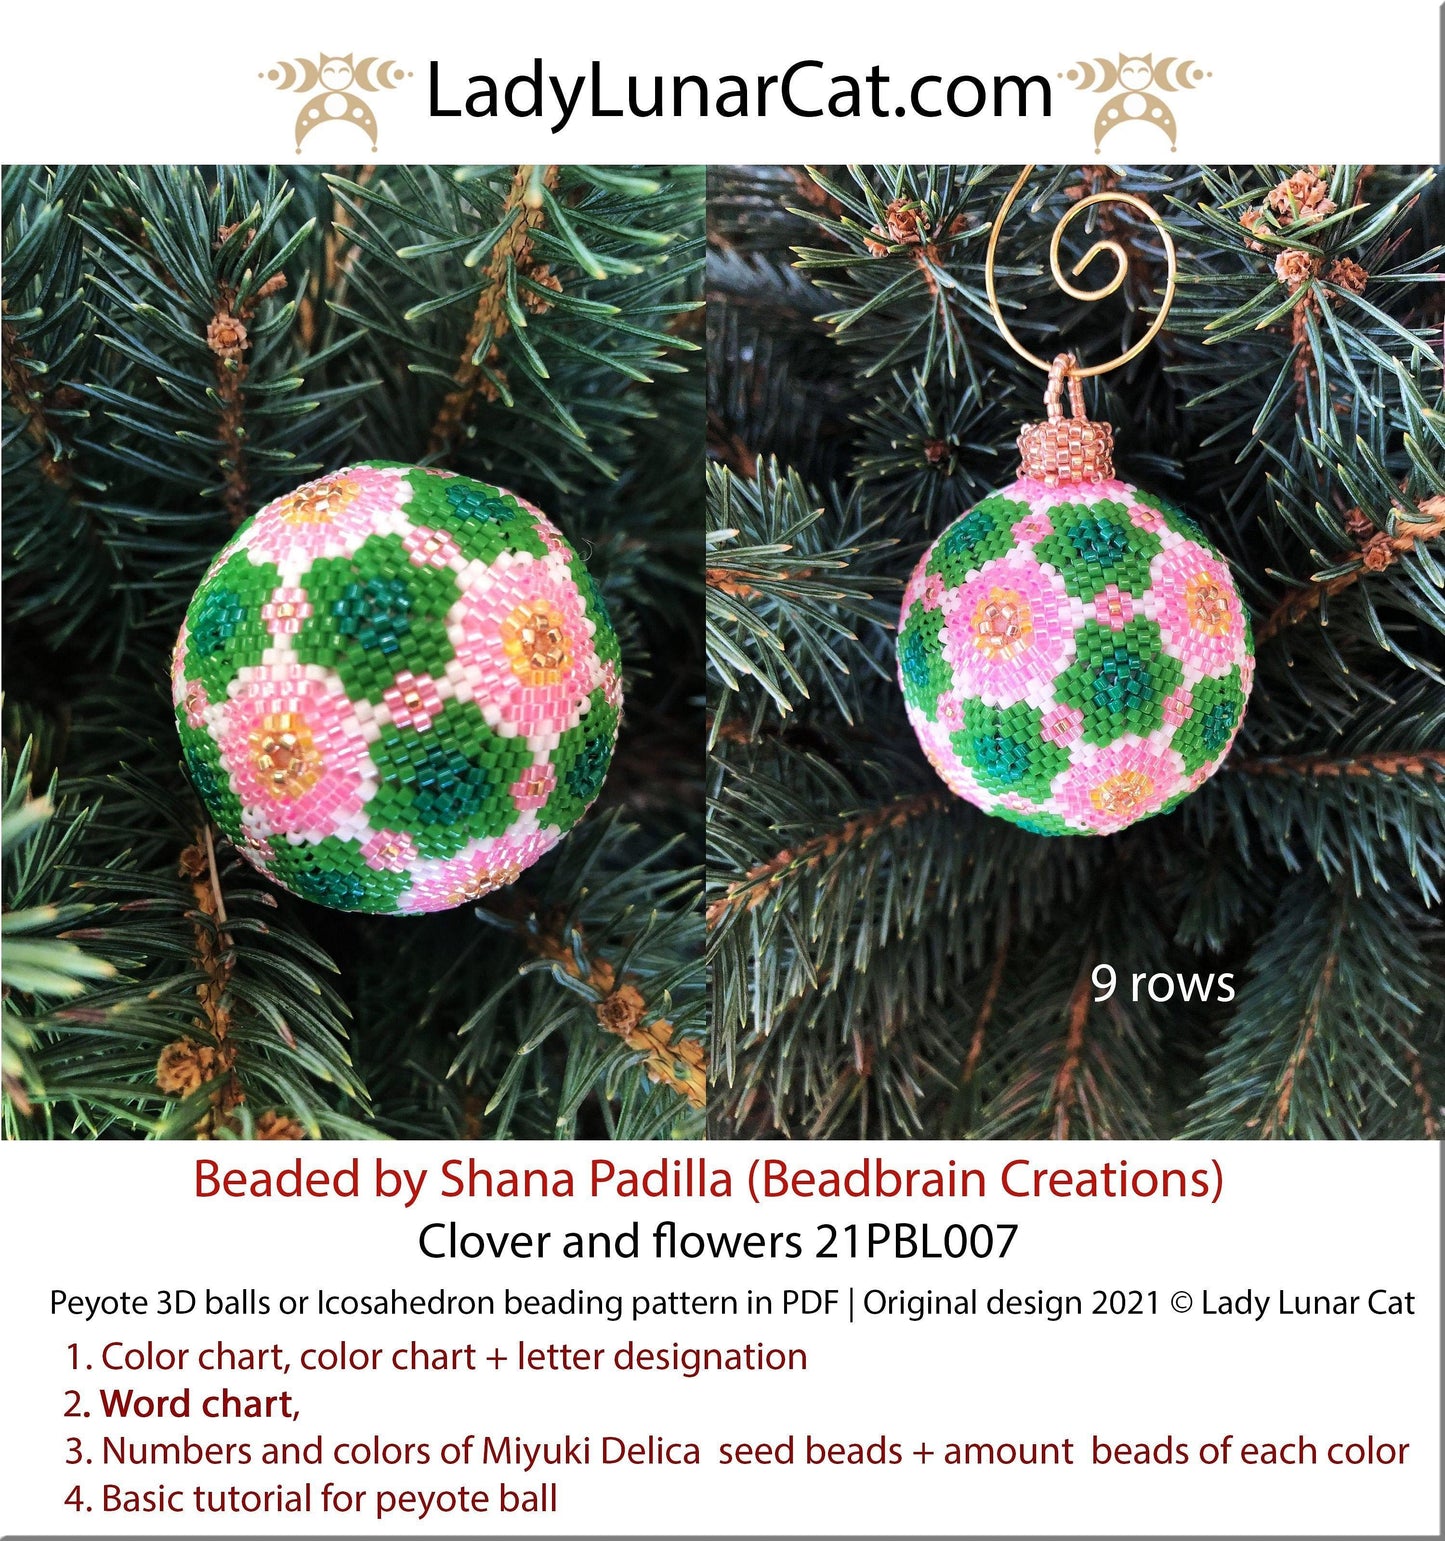 Peyote 3d ball pattern for beading | Beaded Icosahedron Clover and flowers 21PBL007 15/11/9 rows LadyLunarCat